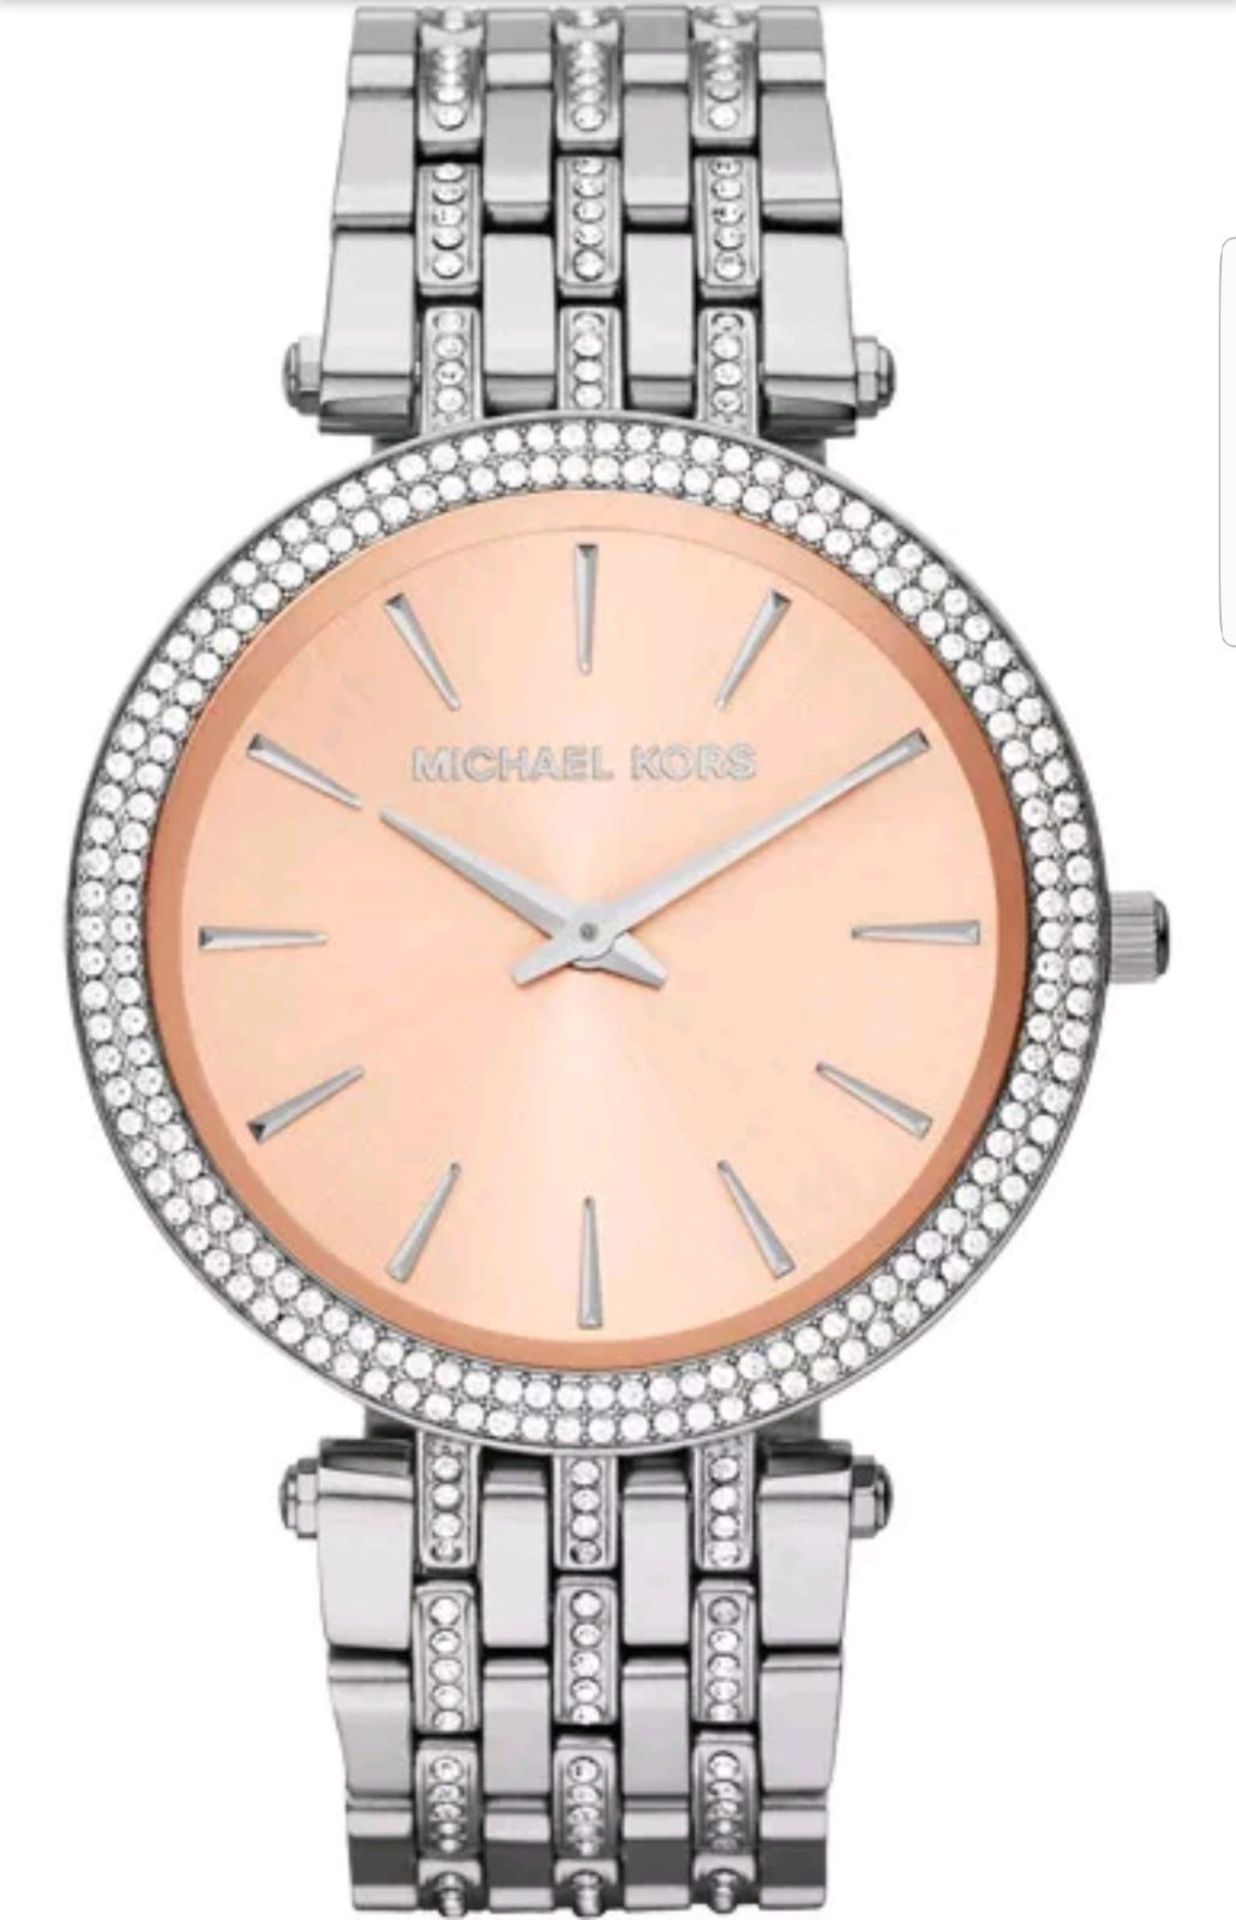 BRAND NEW LADIES MICHAEL KORS WATCH MK3218, COMPLETE WITH ORIGINAL BOX AND MANUAL - FREE P & P